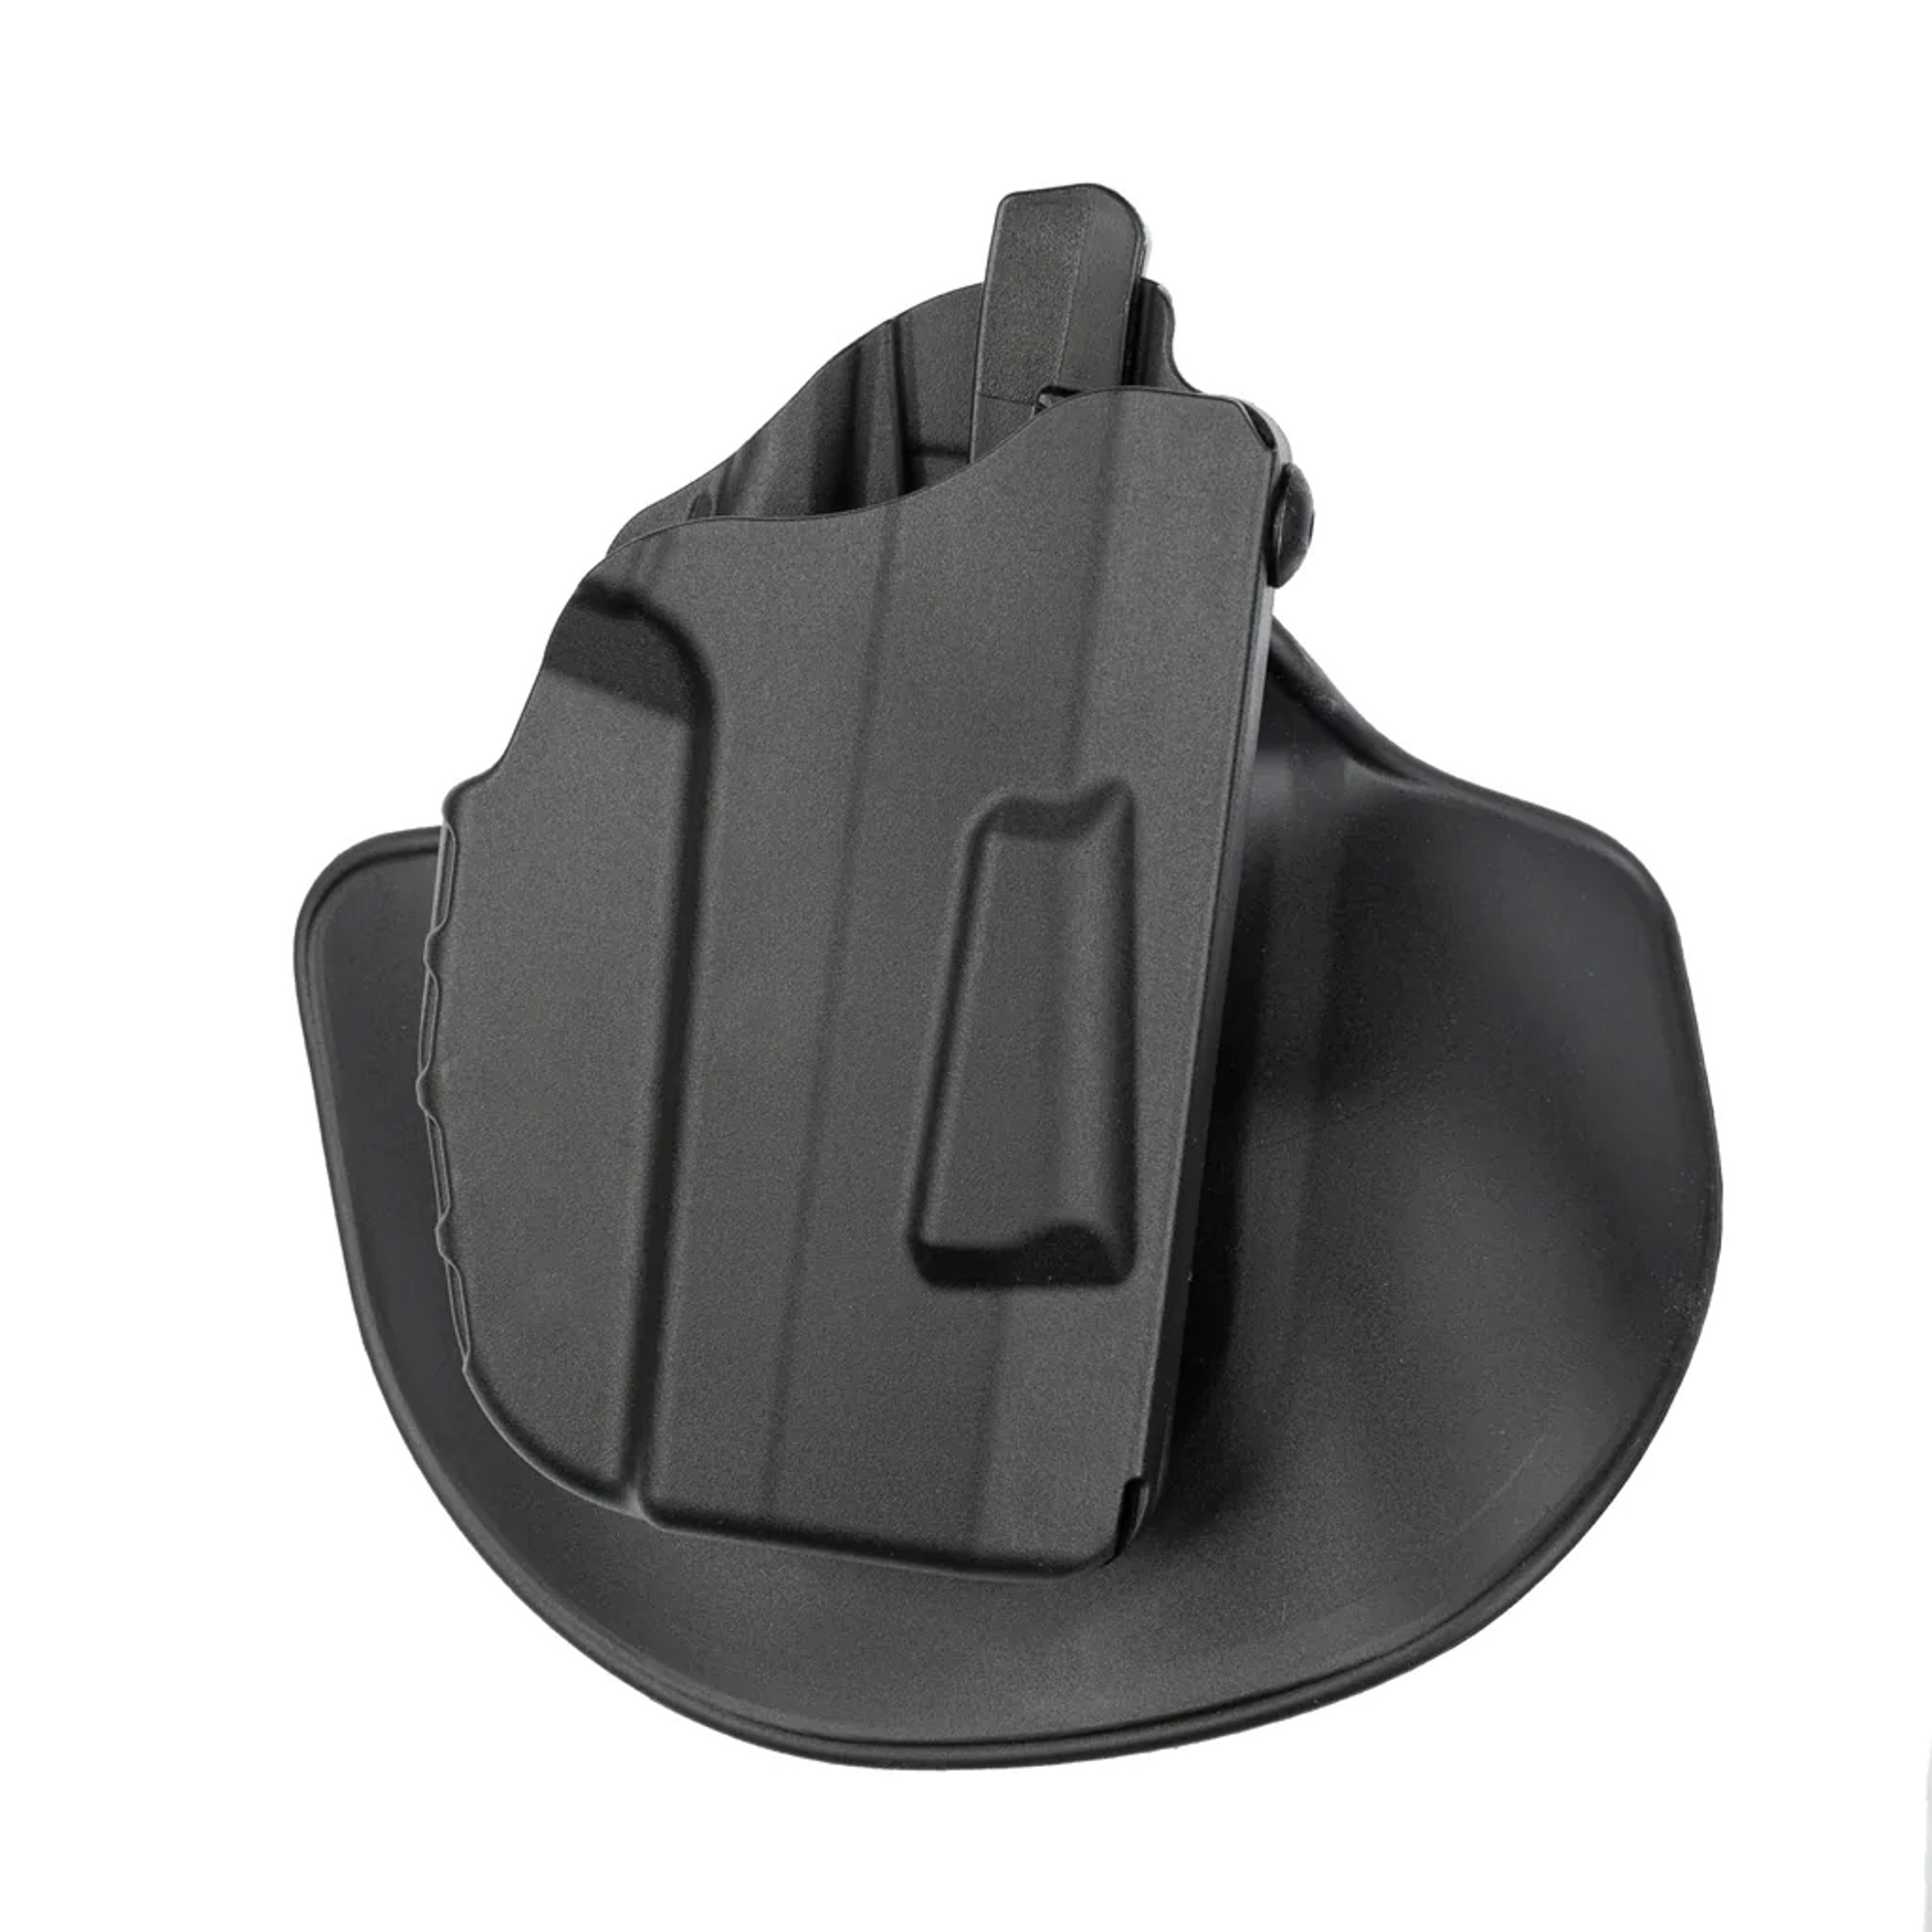 Model 7378 7ts Als Concealment Paddle And Belt Loop Combo Holster For Glock 29 W/ Compact Light